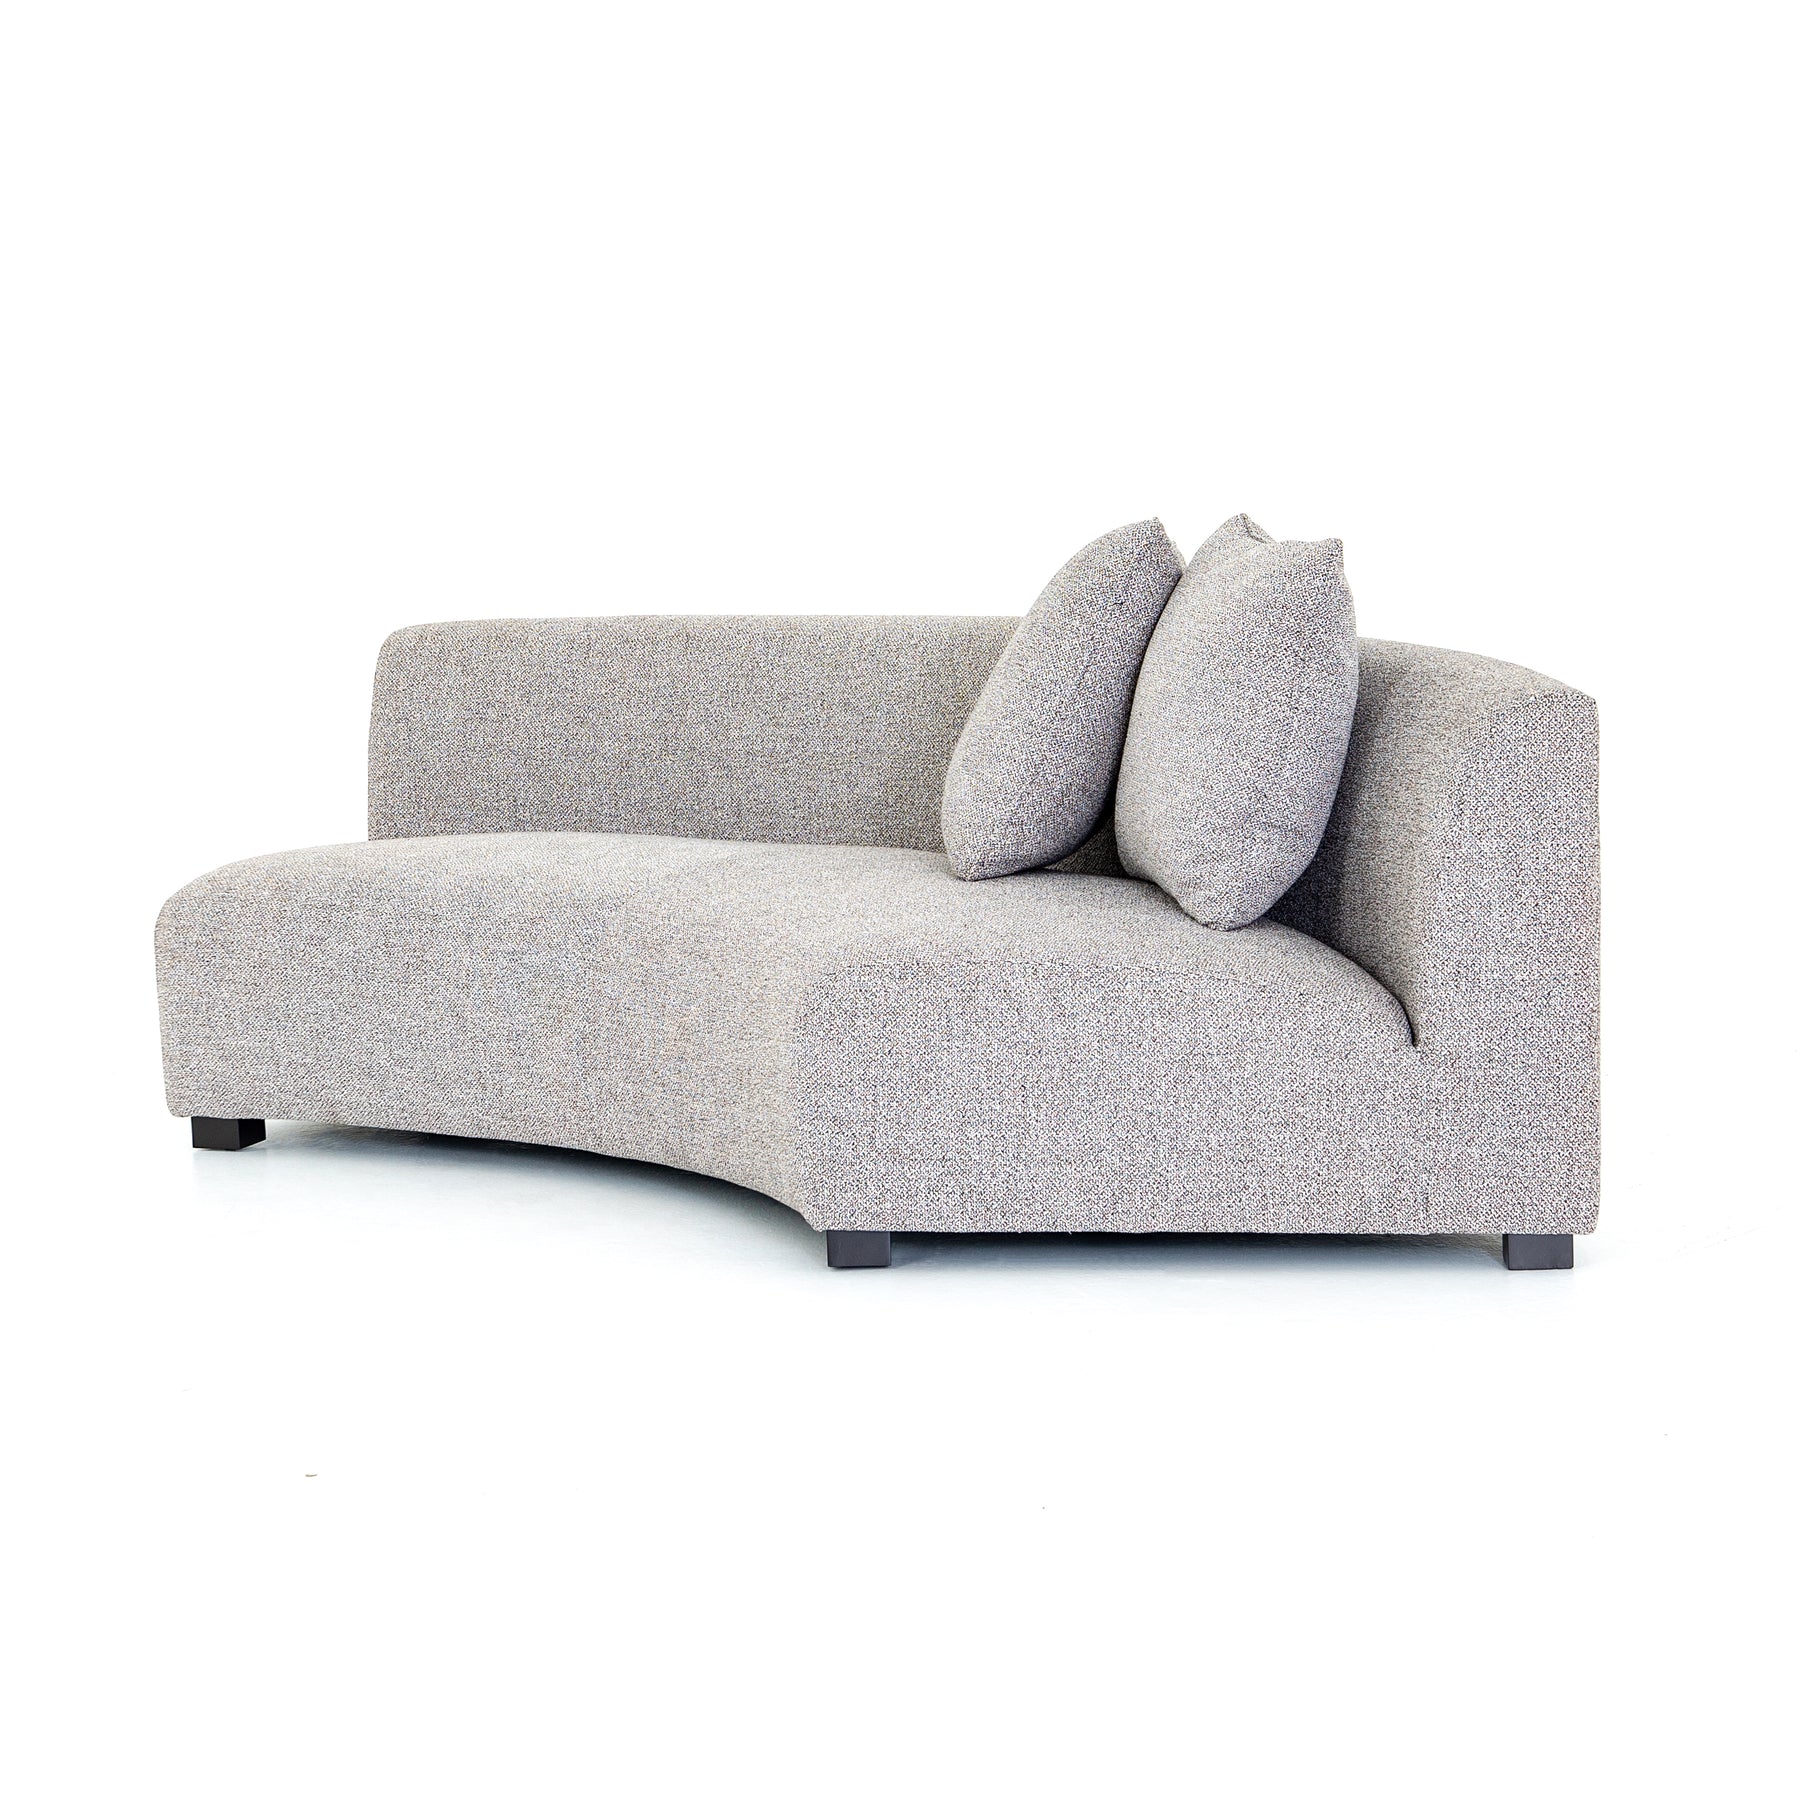 Shop Liam Sectional Right Arm Facing in Various Colors | Burke Decor